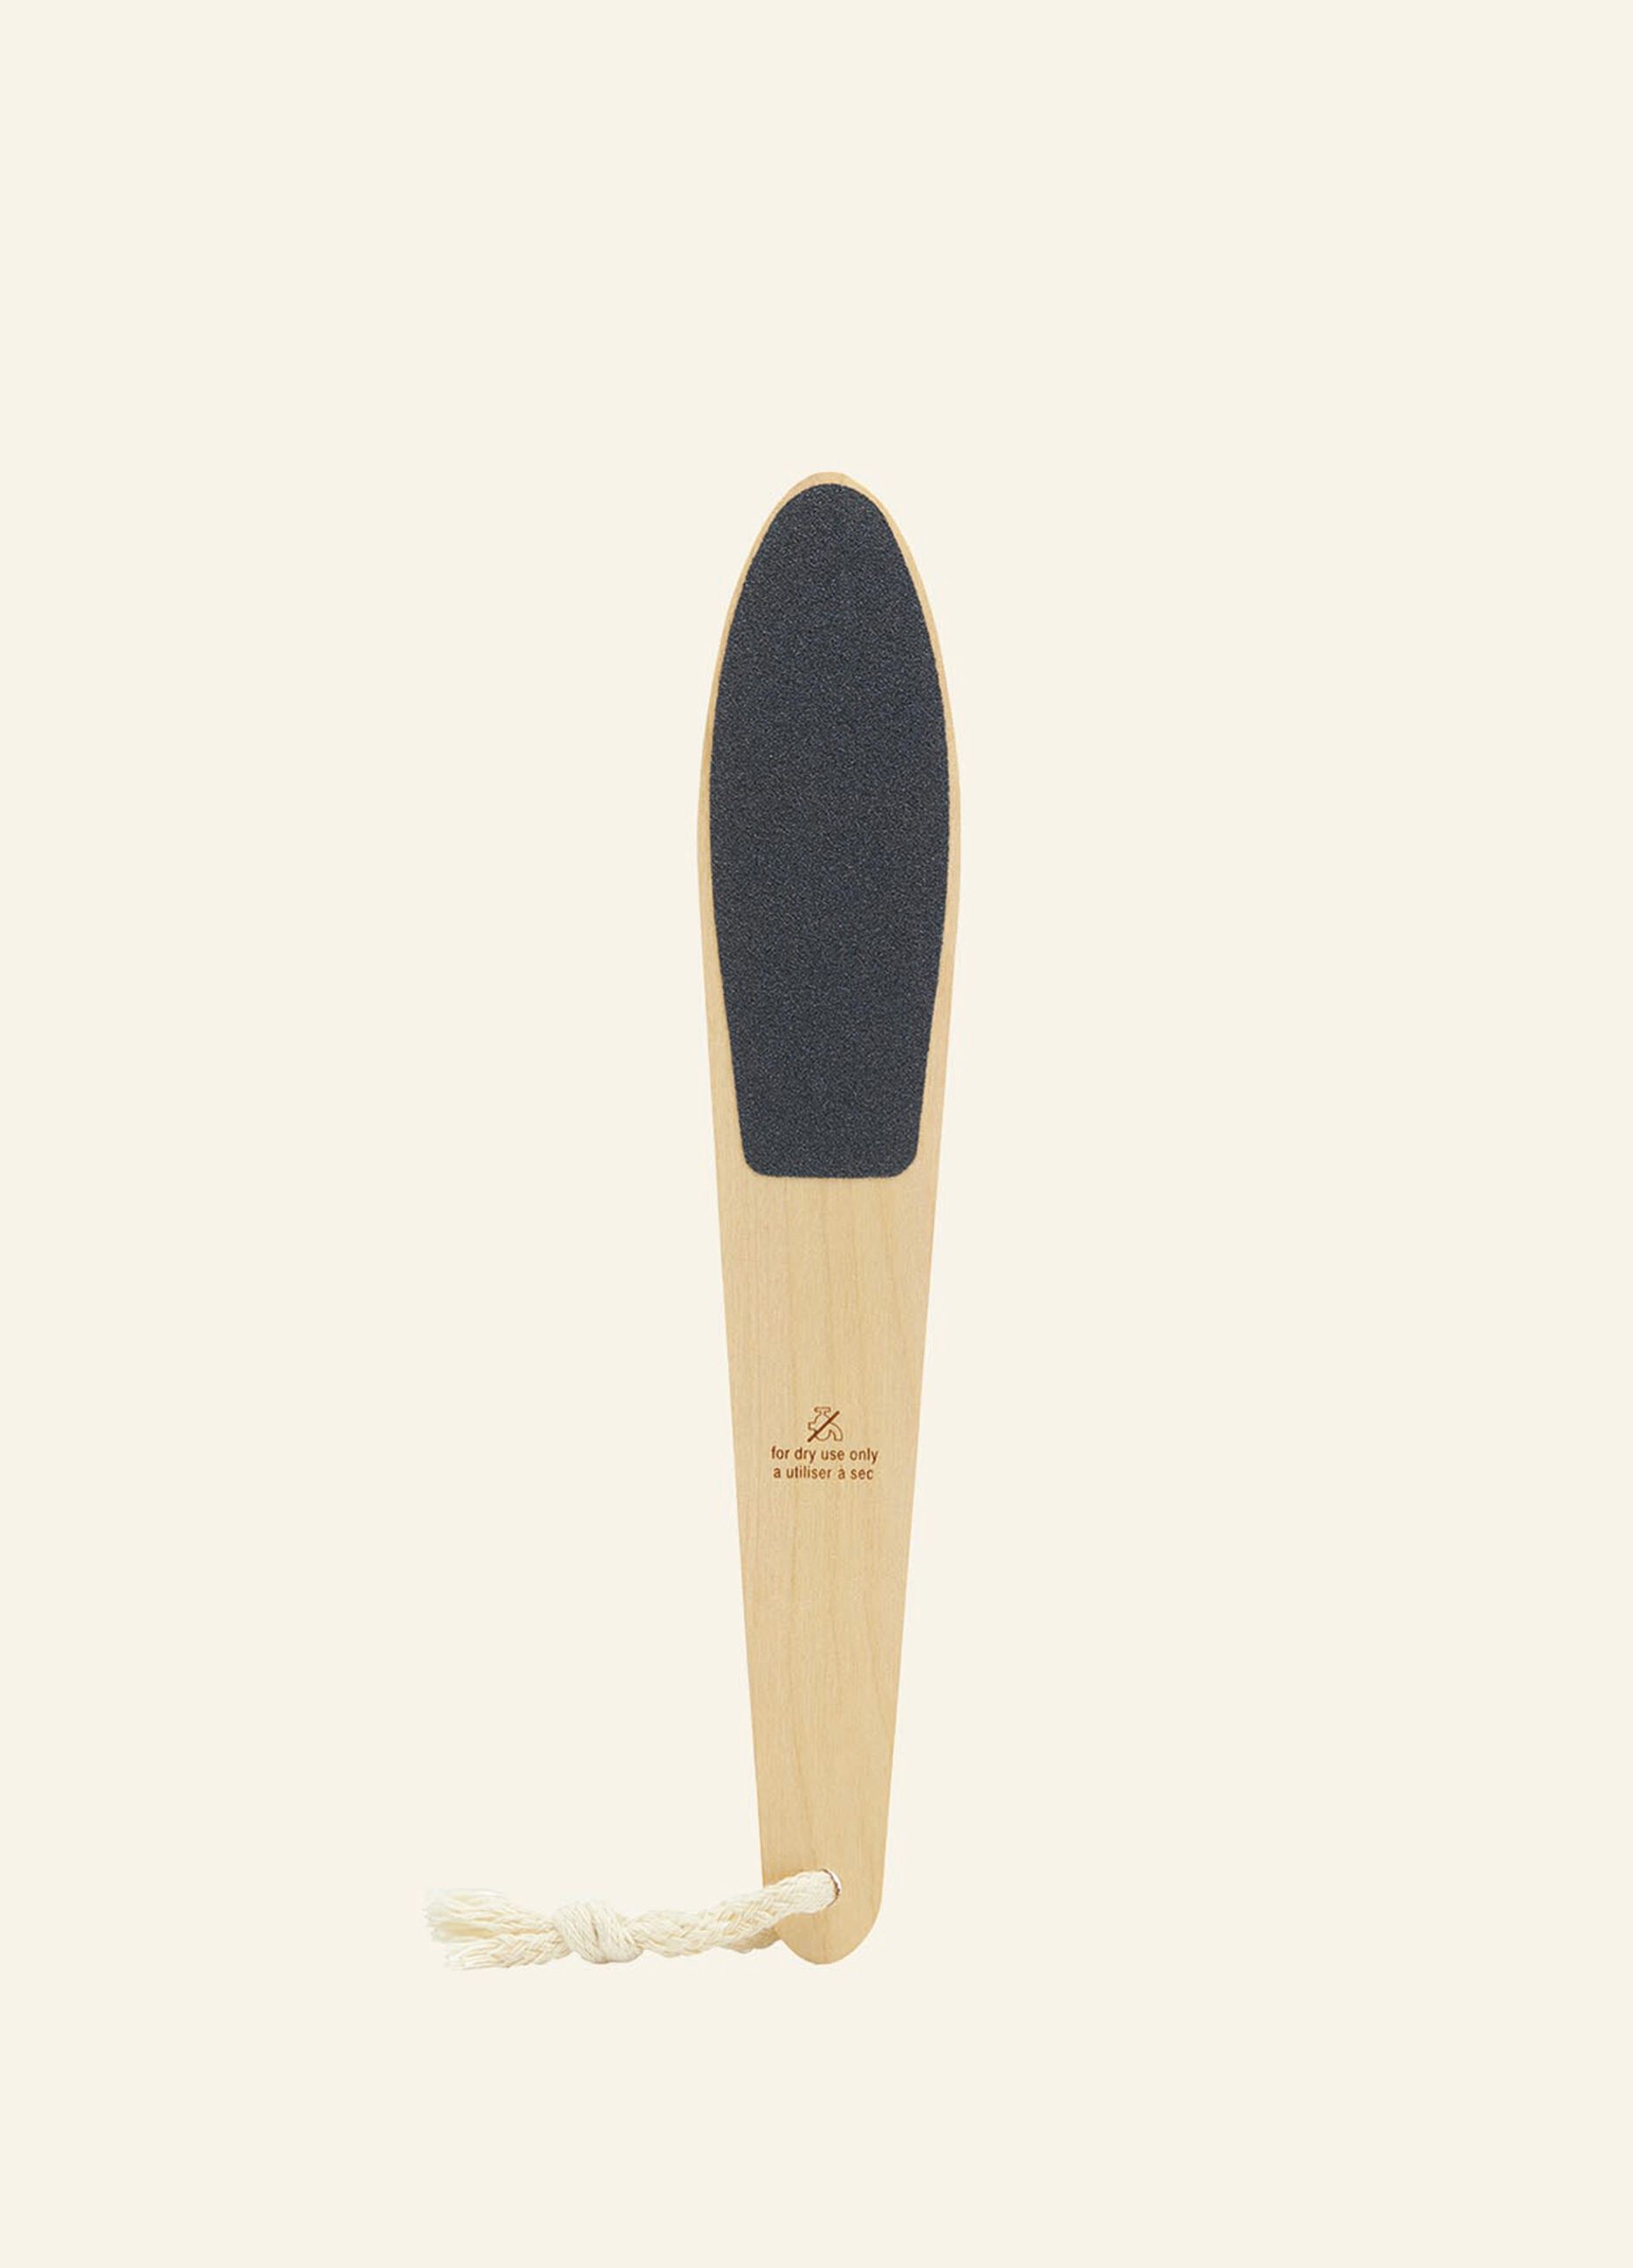 The Body Shop foot file